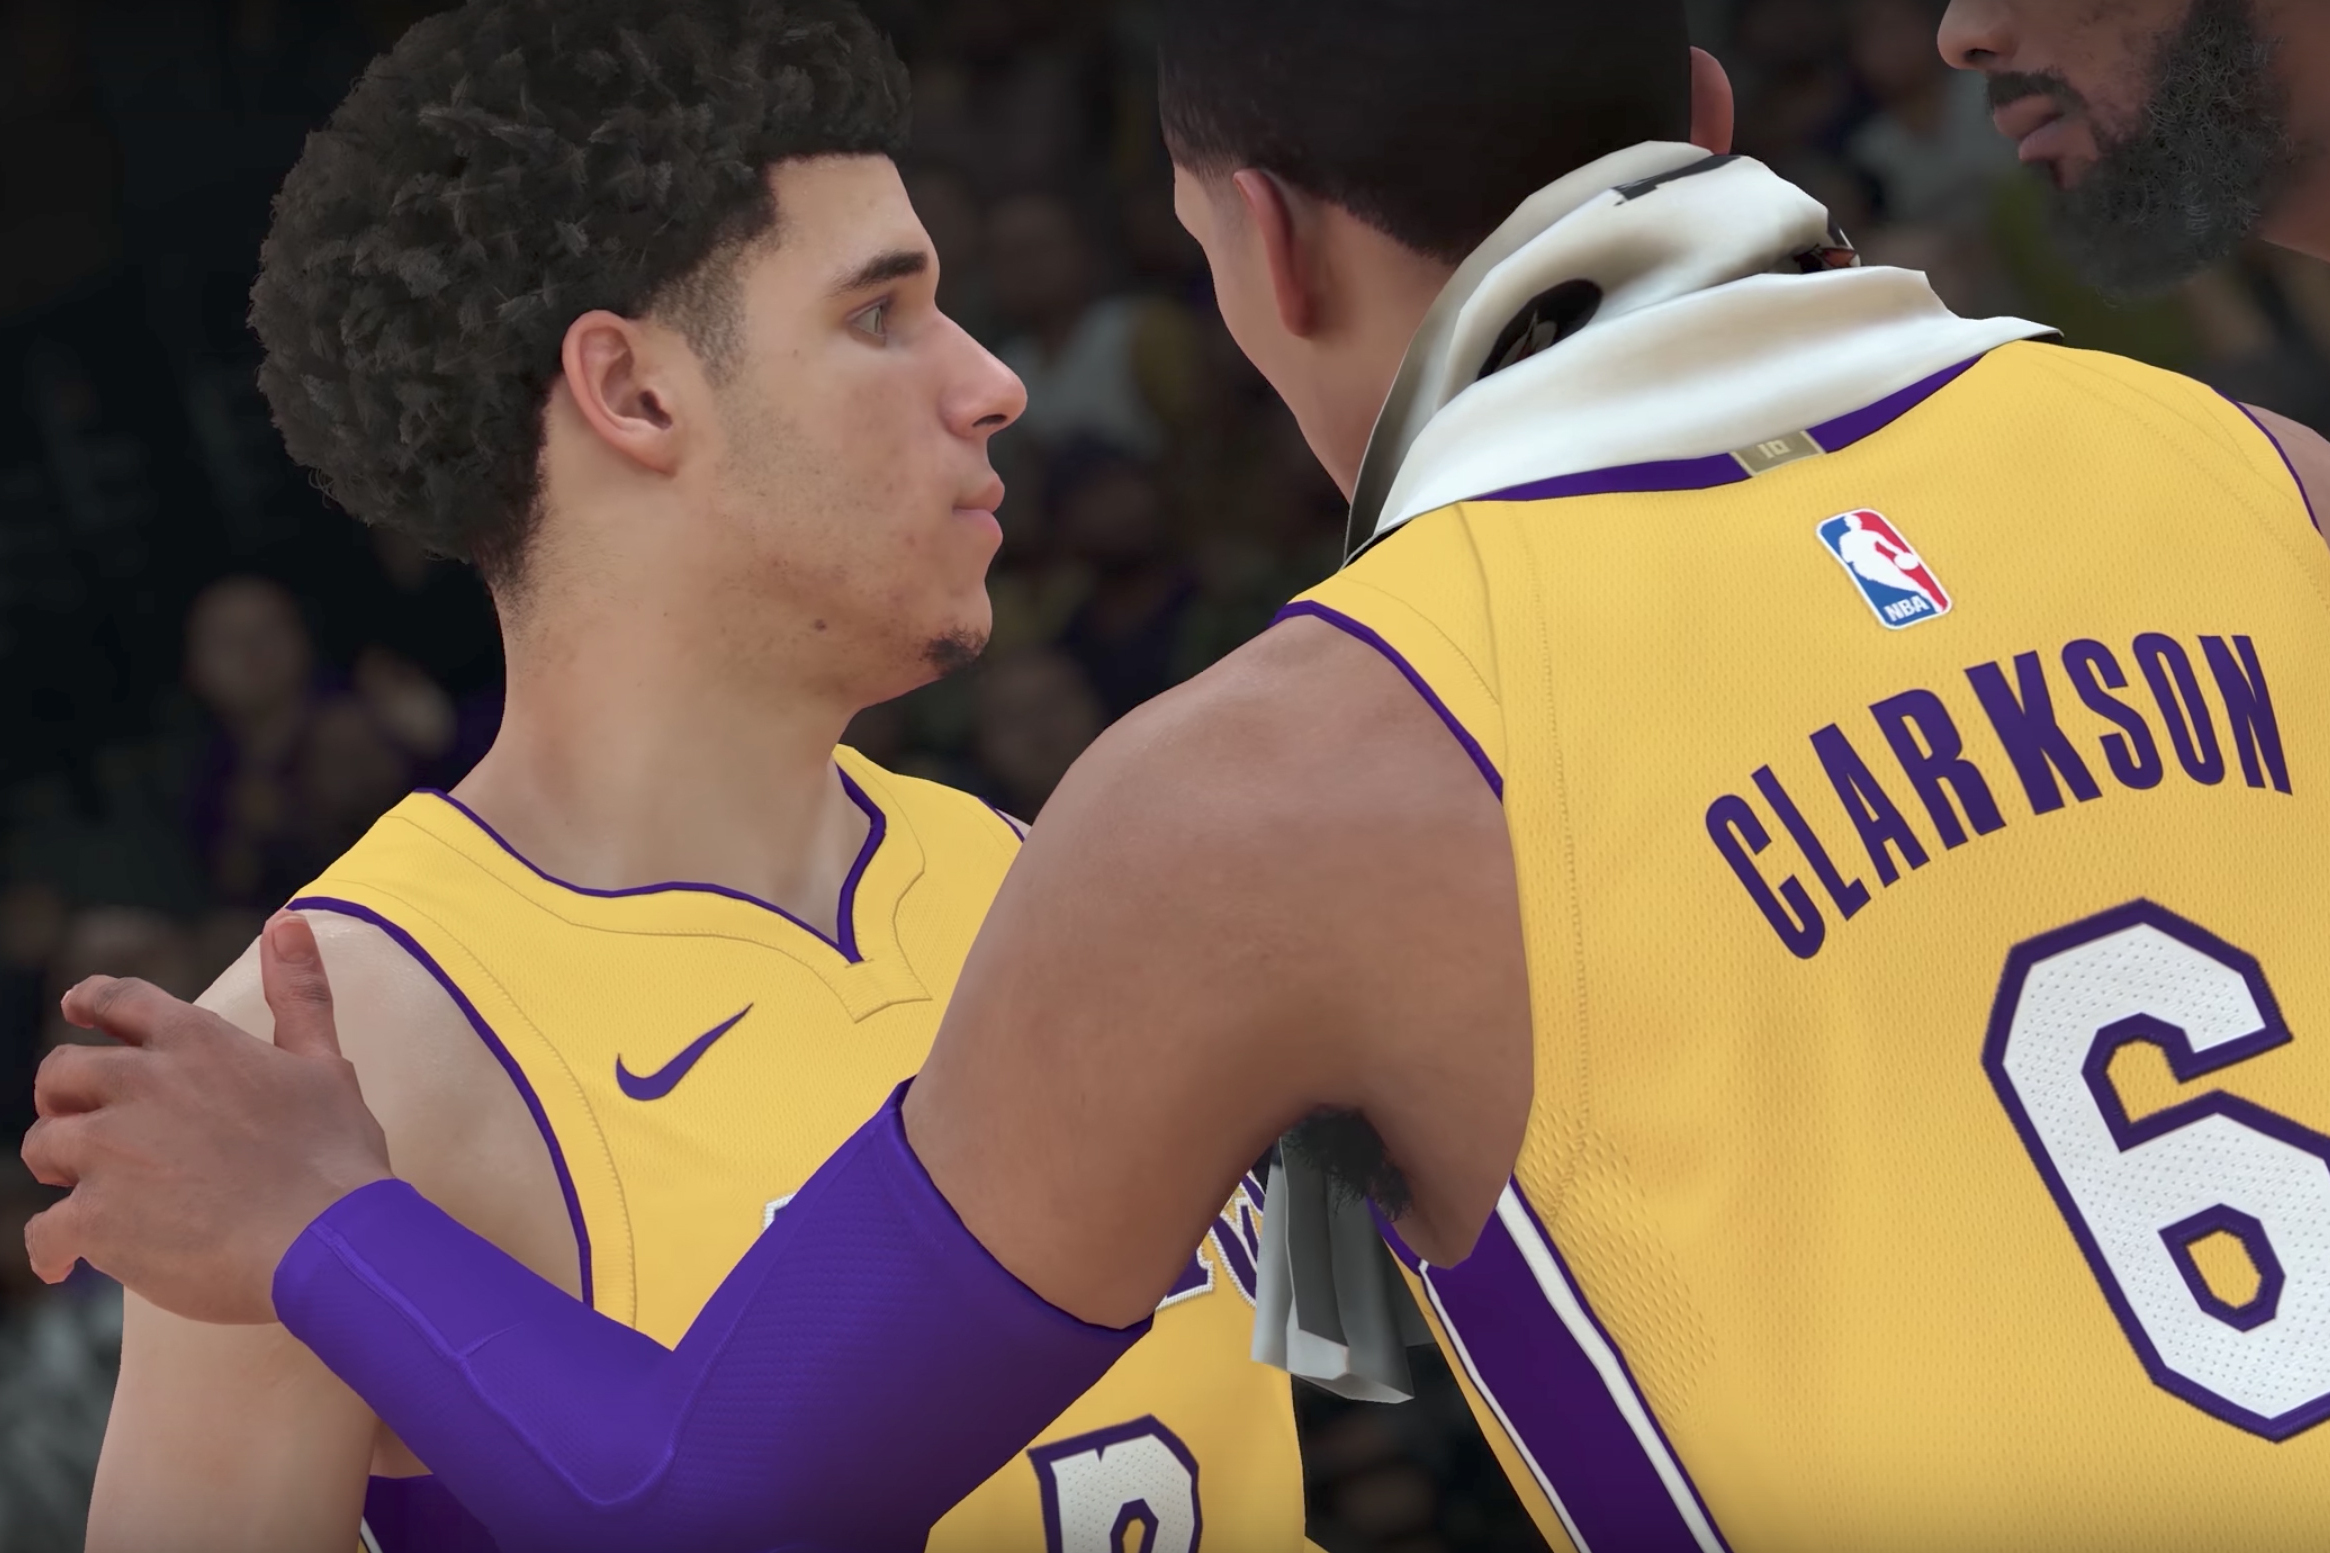 Meet the Brains Behind the NBA 2K18 Player Ratings